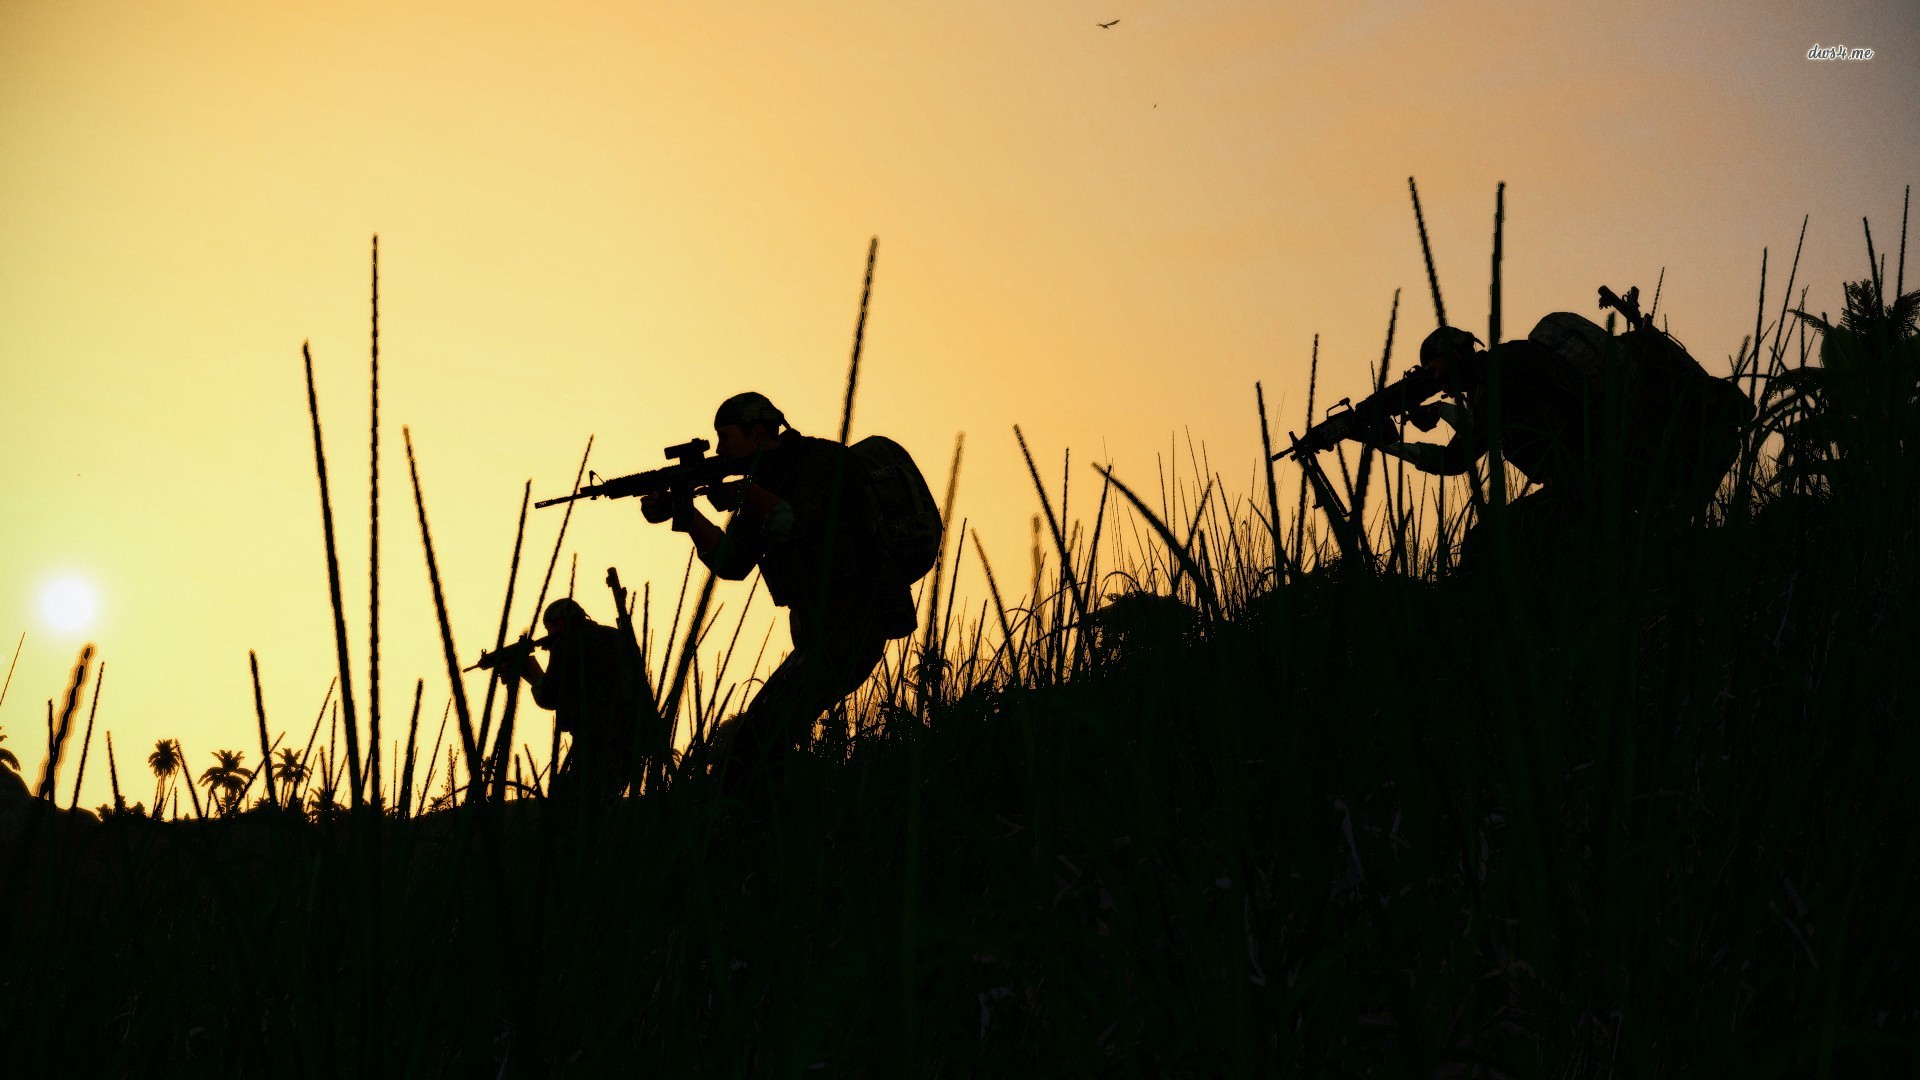 Silhouettes of soldiers attacking wallpaper - Photography ...